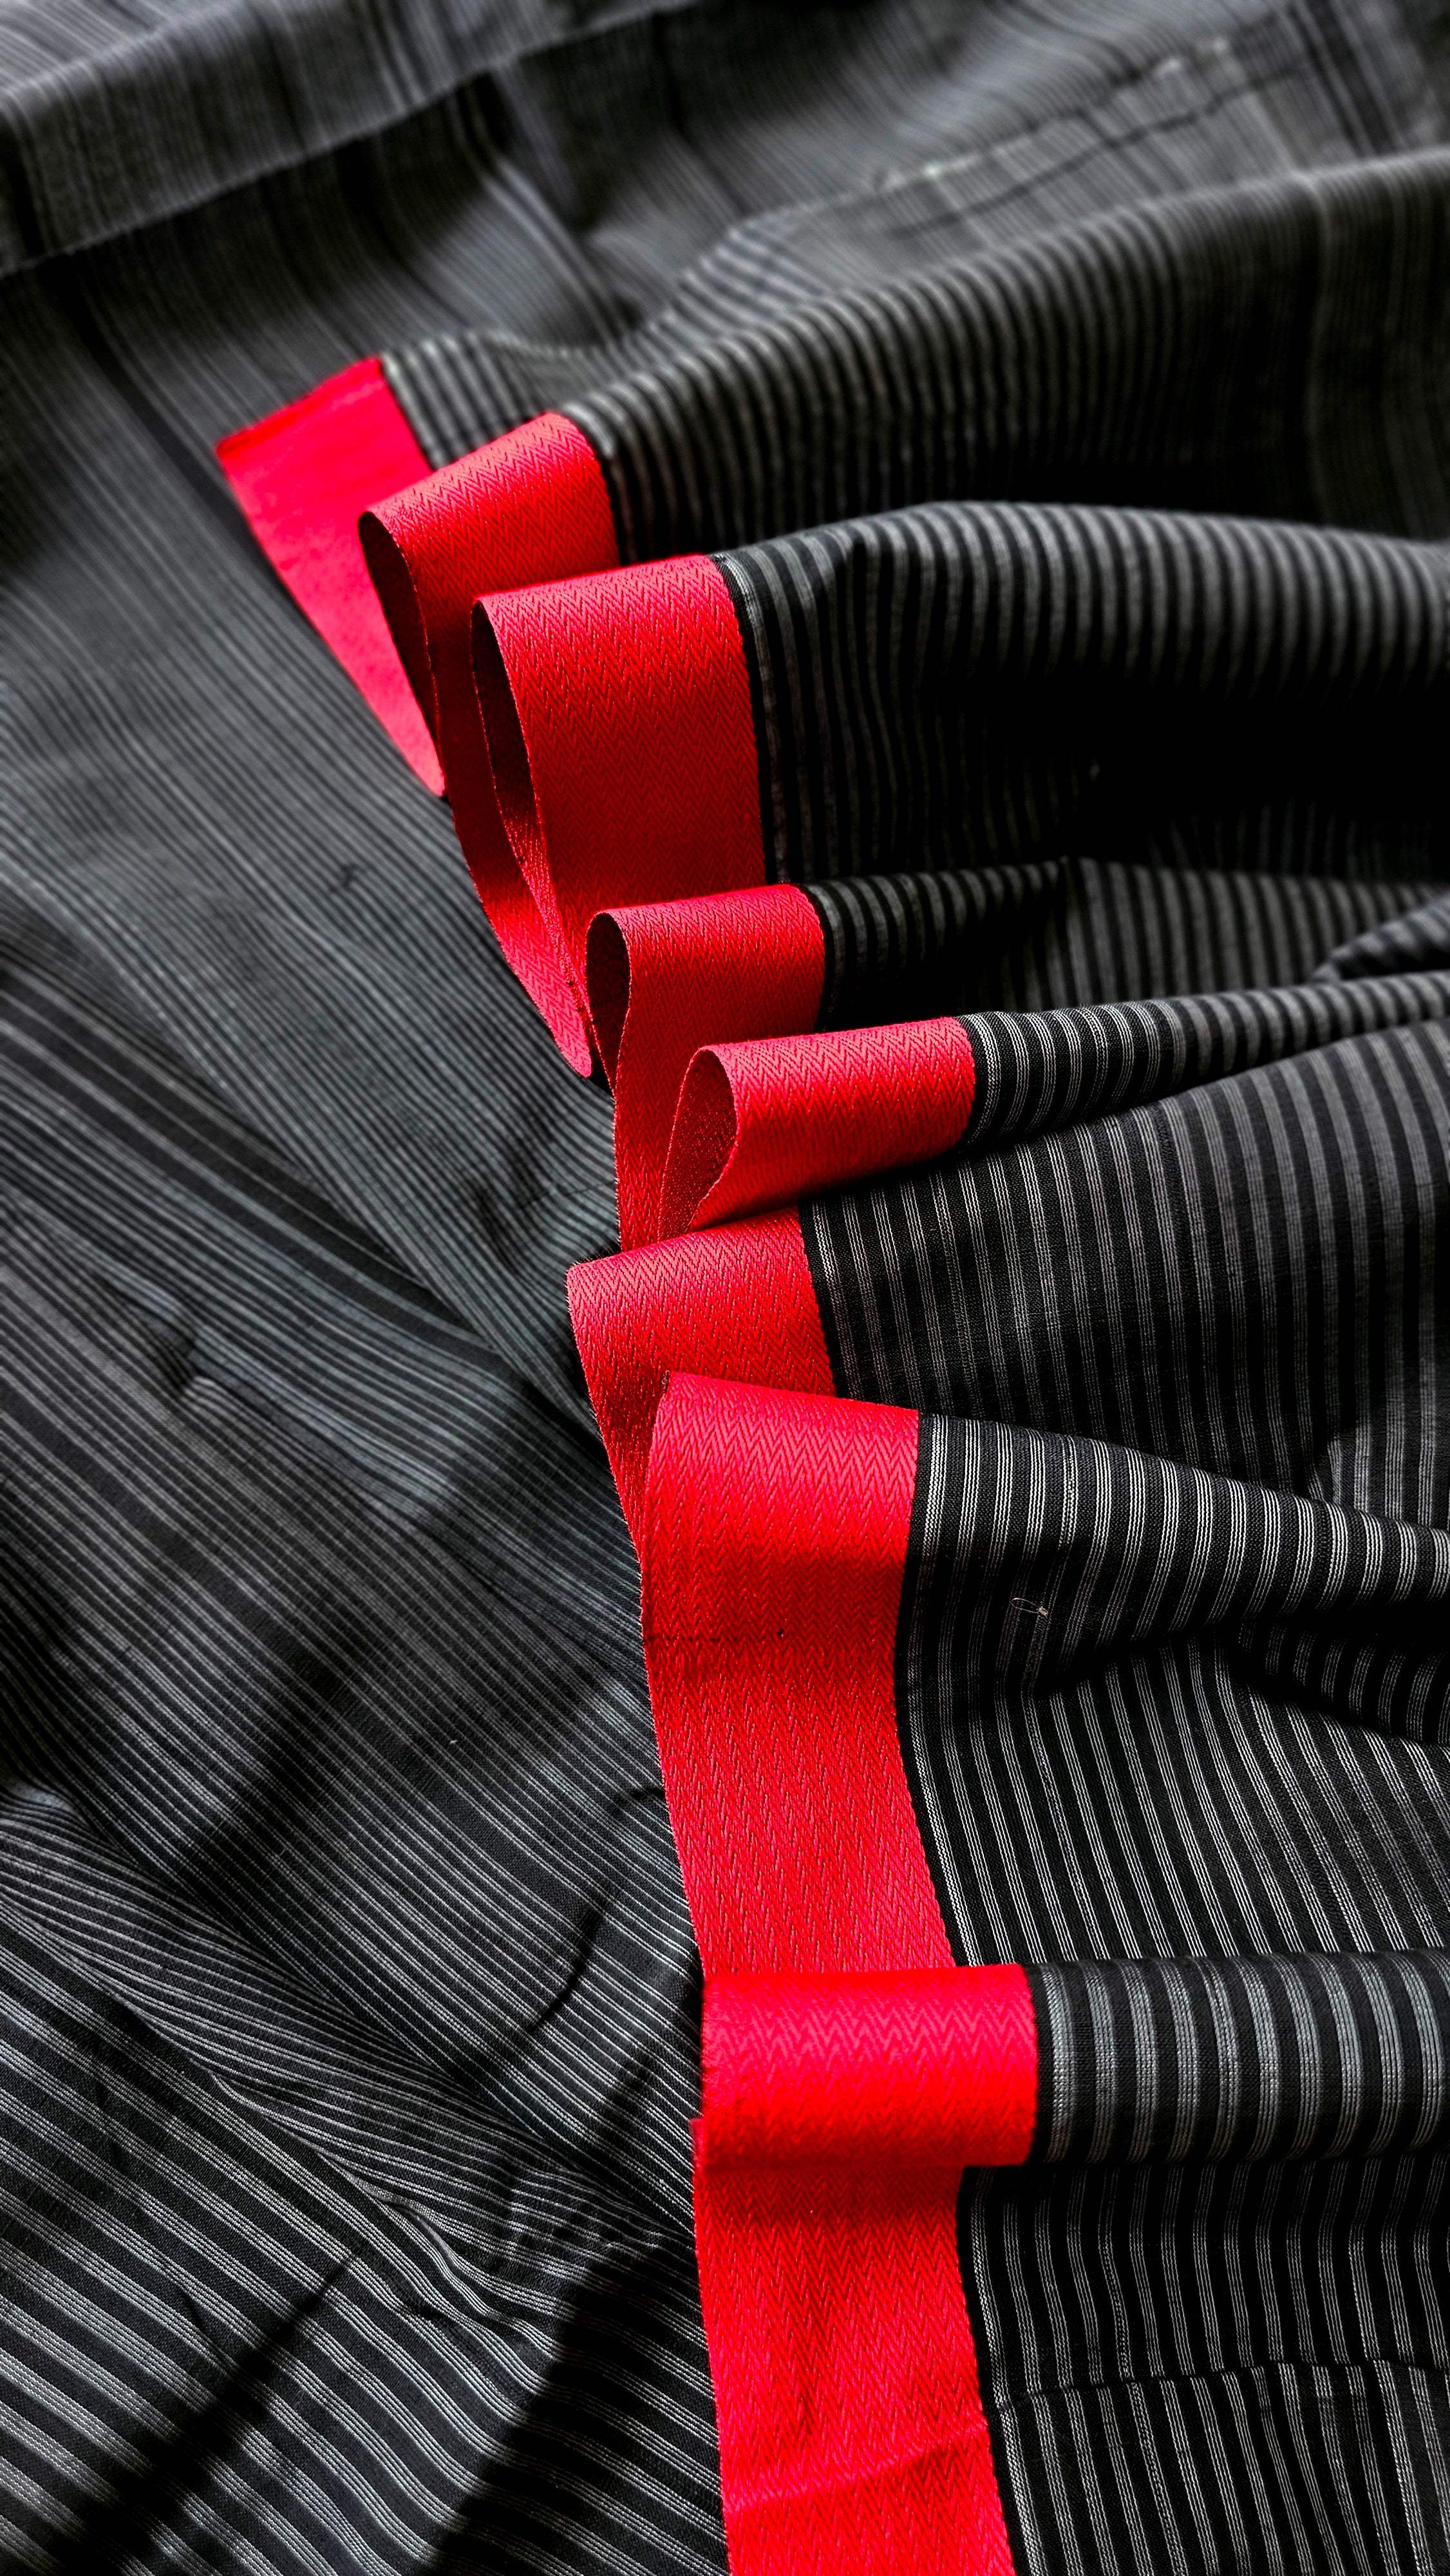 Black and White uneven Warp Stripes Fabric with Red Woven Borders